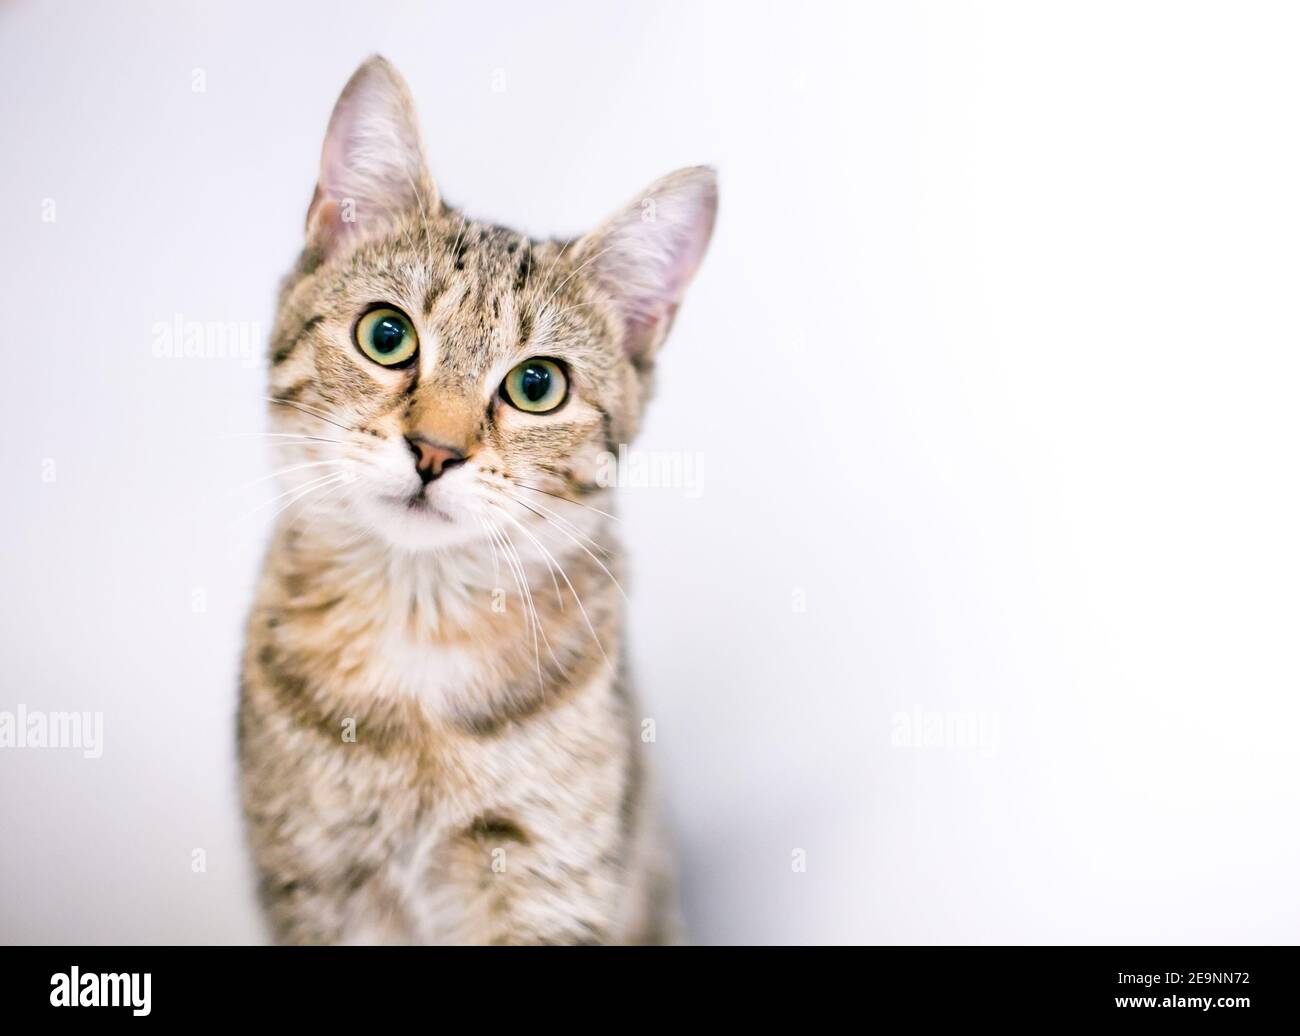 A cute tabby shorthair cat looking at the camera with a head tilt Stock Photo